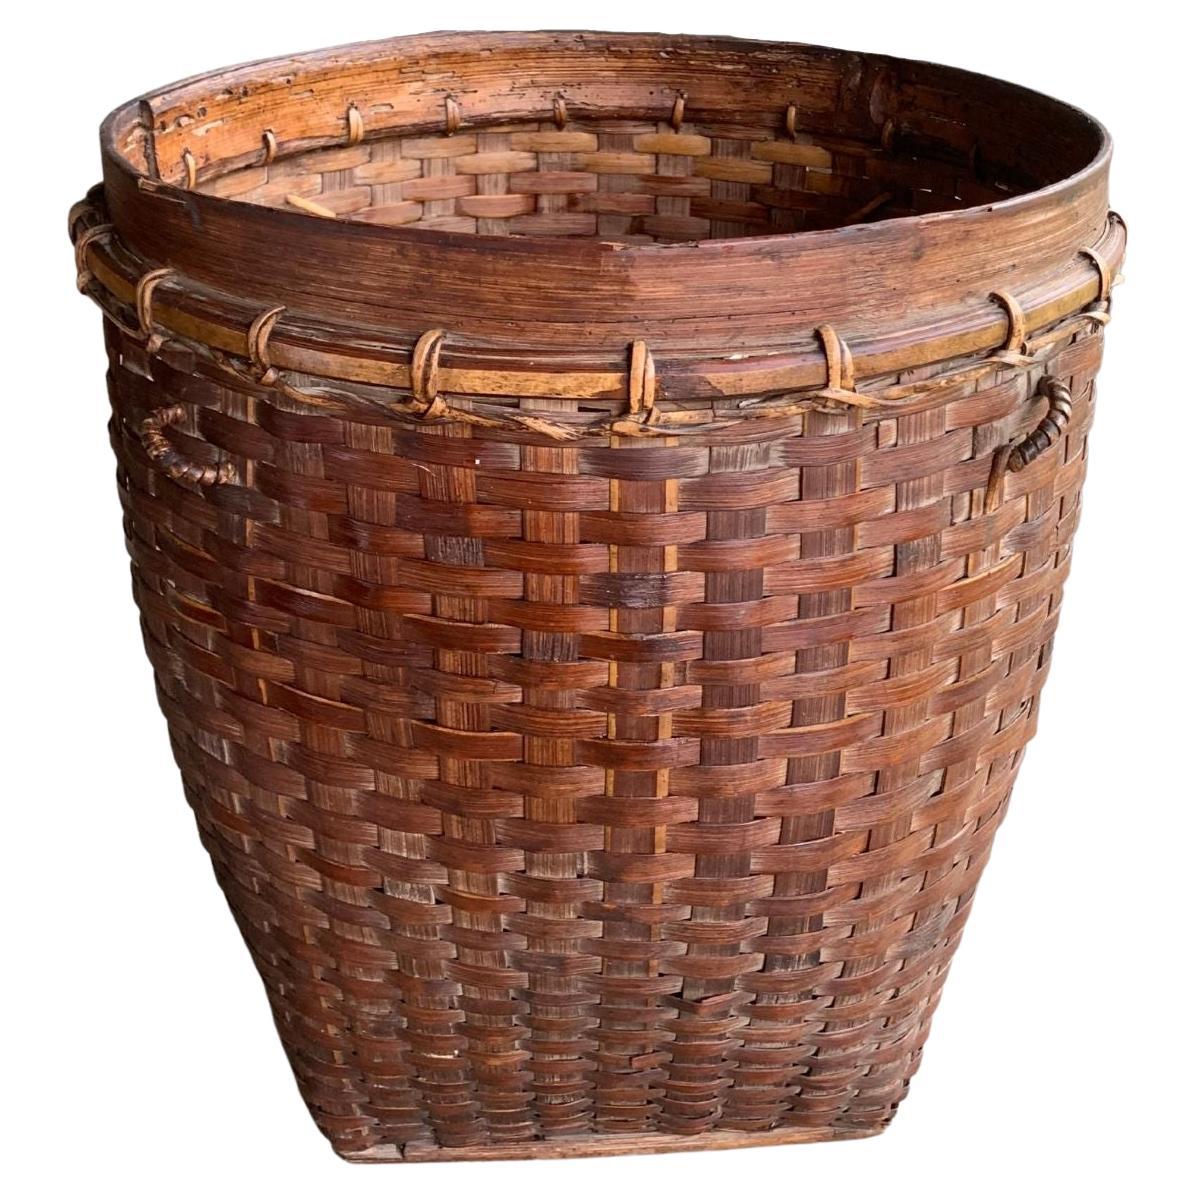 Rattan Basket Dayak Tribe Hand-Woven from Kalimantan, Borneo, Mid-20th Century For Sale